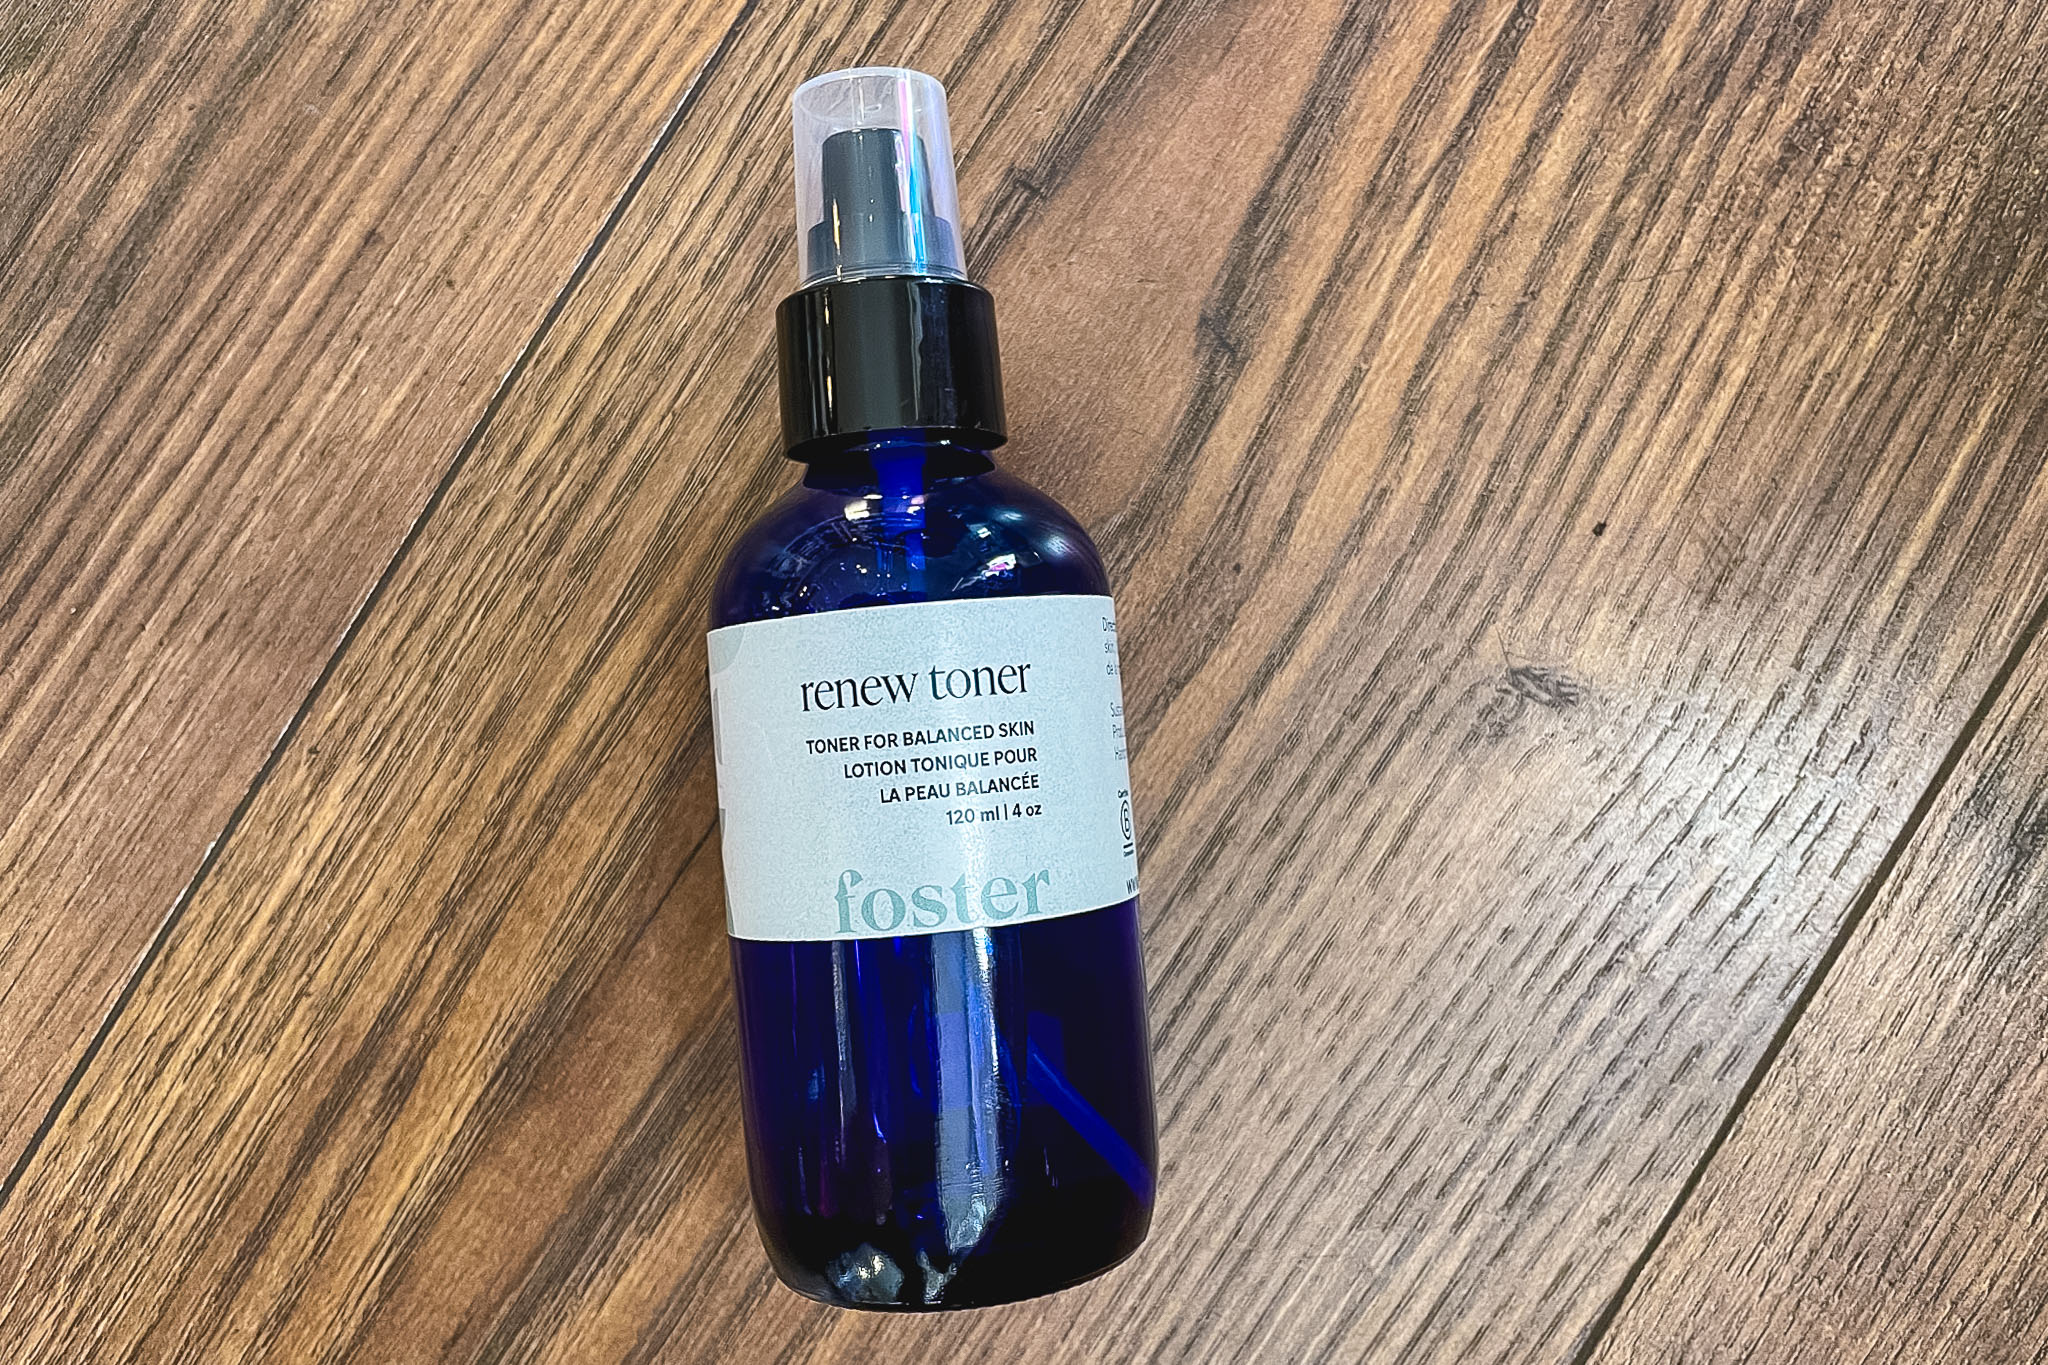 Renew Toner by Foster